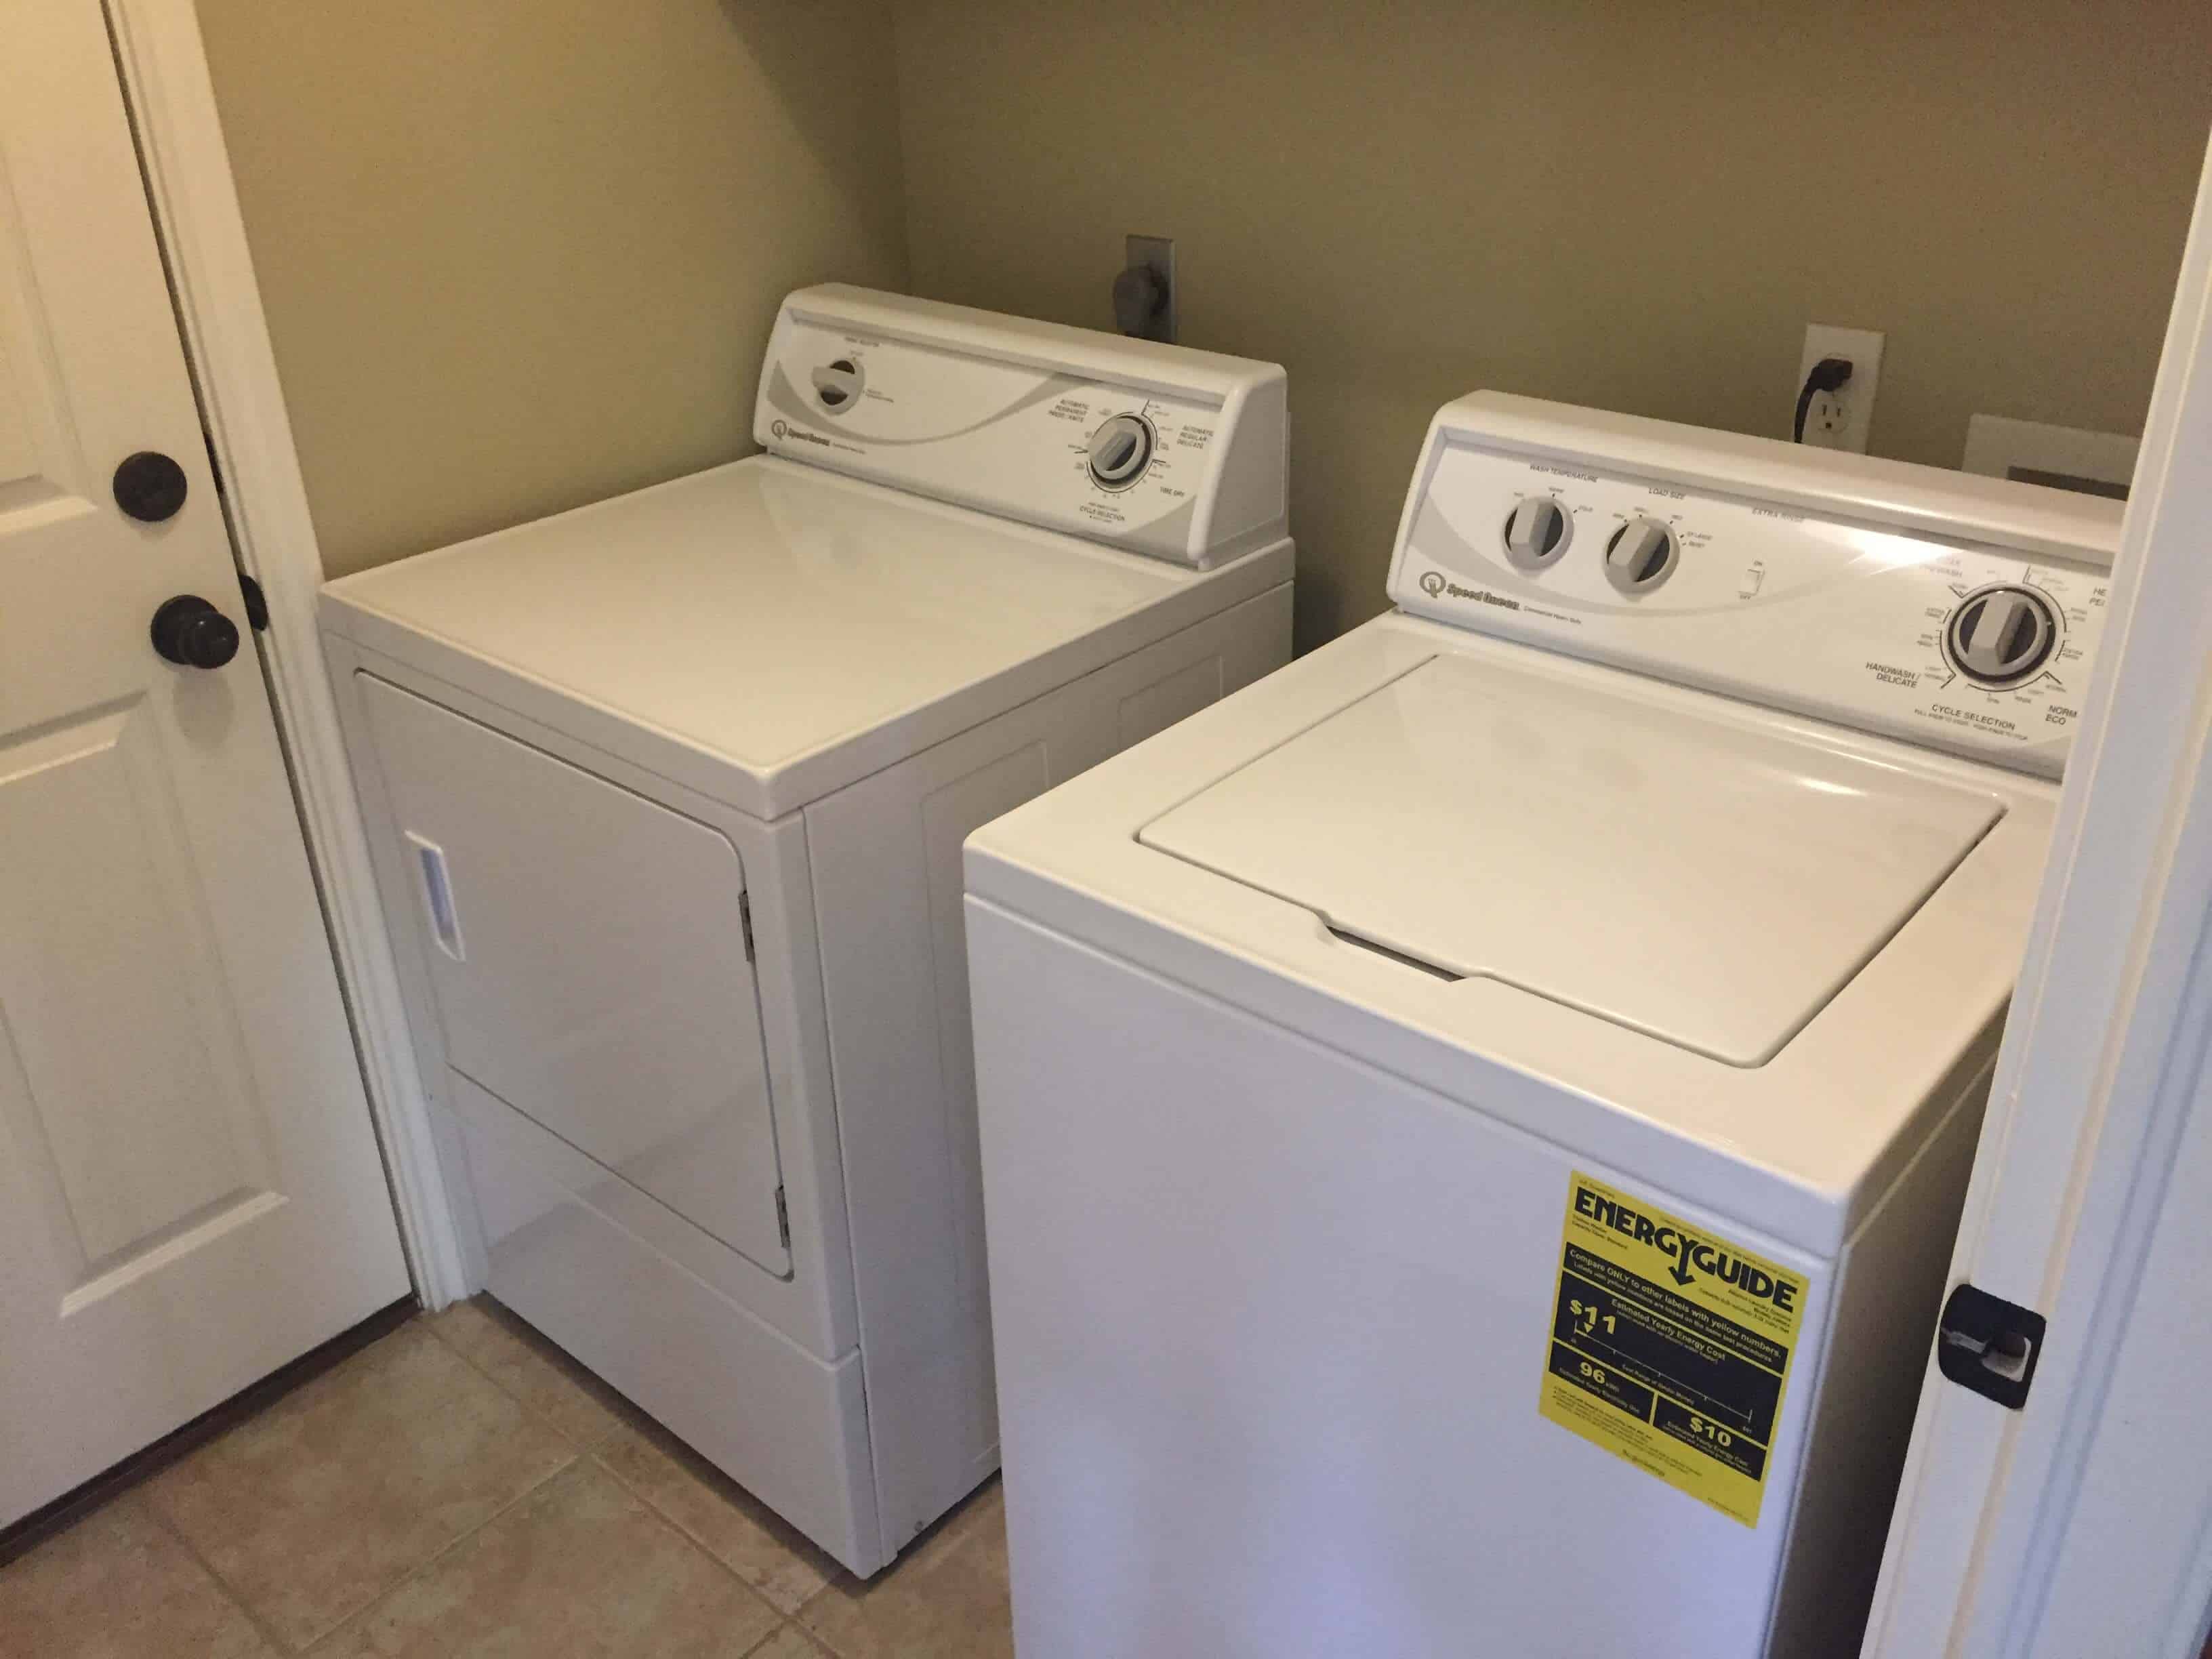 Speed Queen Washers and Dryers - The little known brand that is